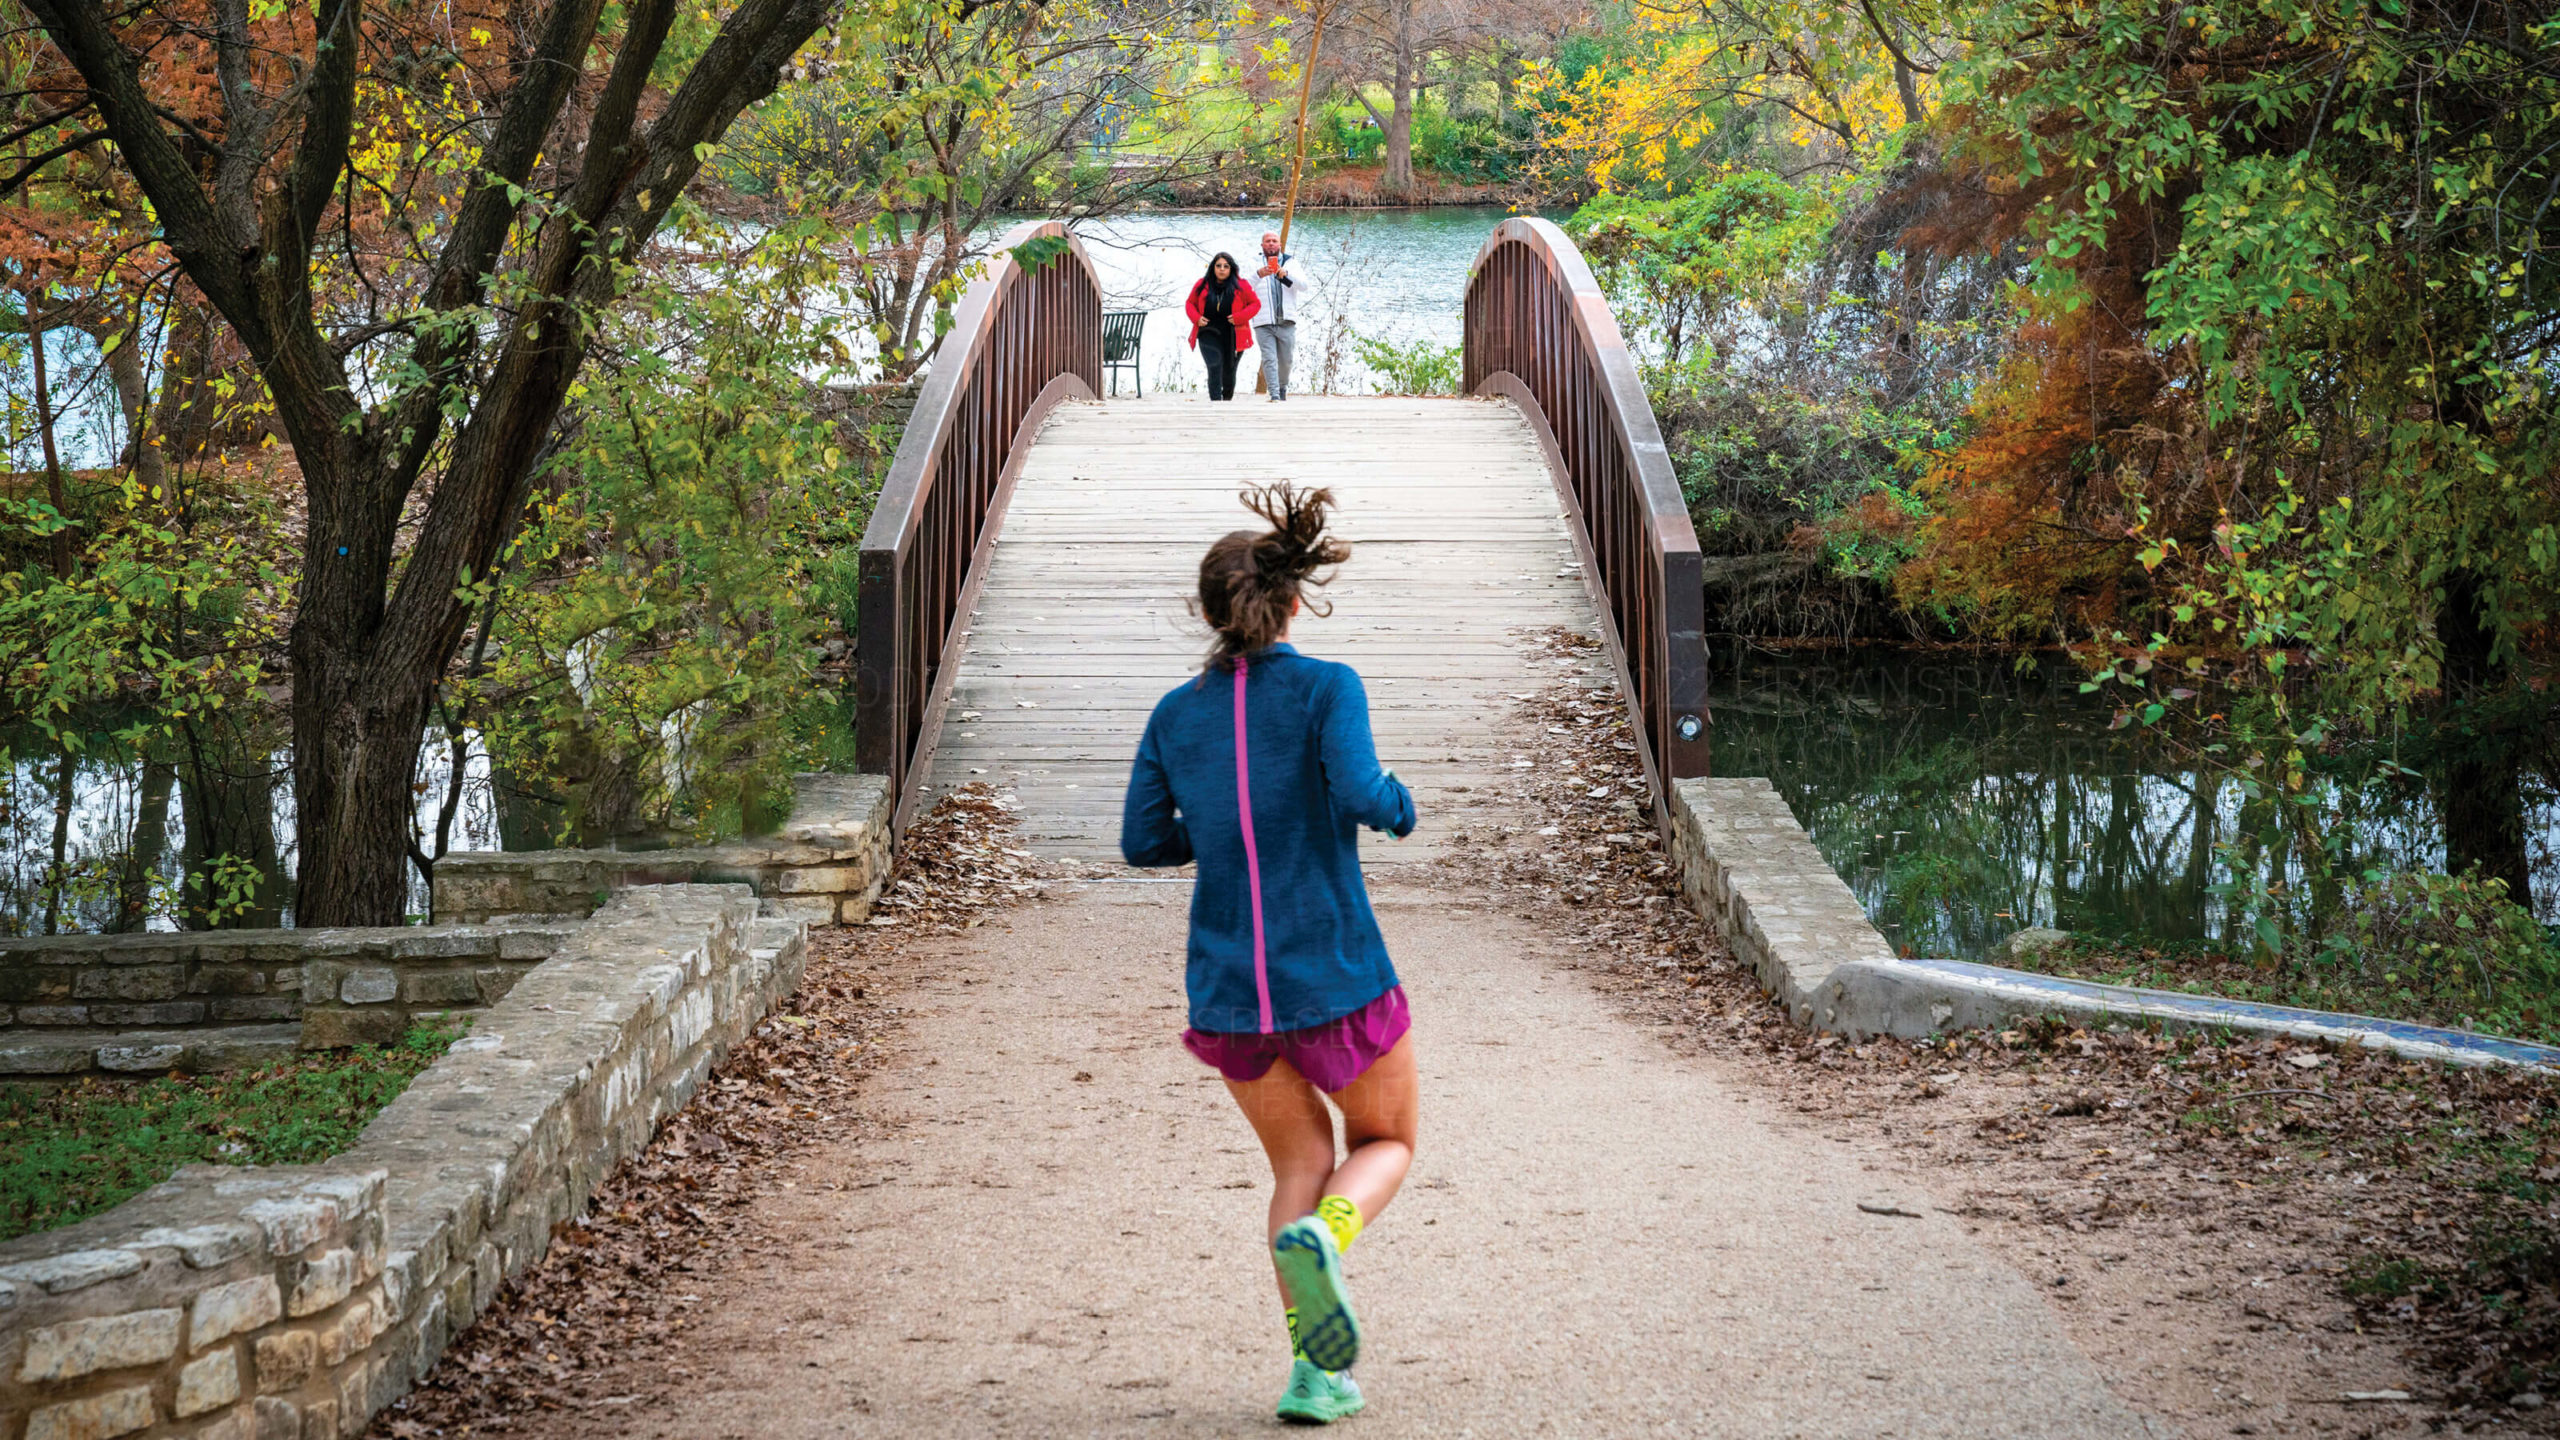 The Modern Austin neighborhood - work on your fitness in the beauty of nature